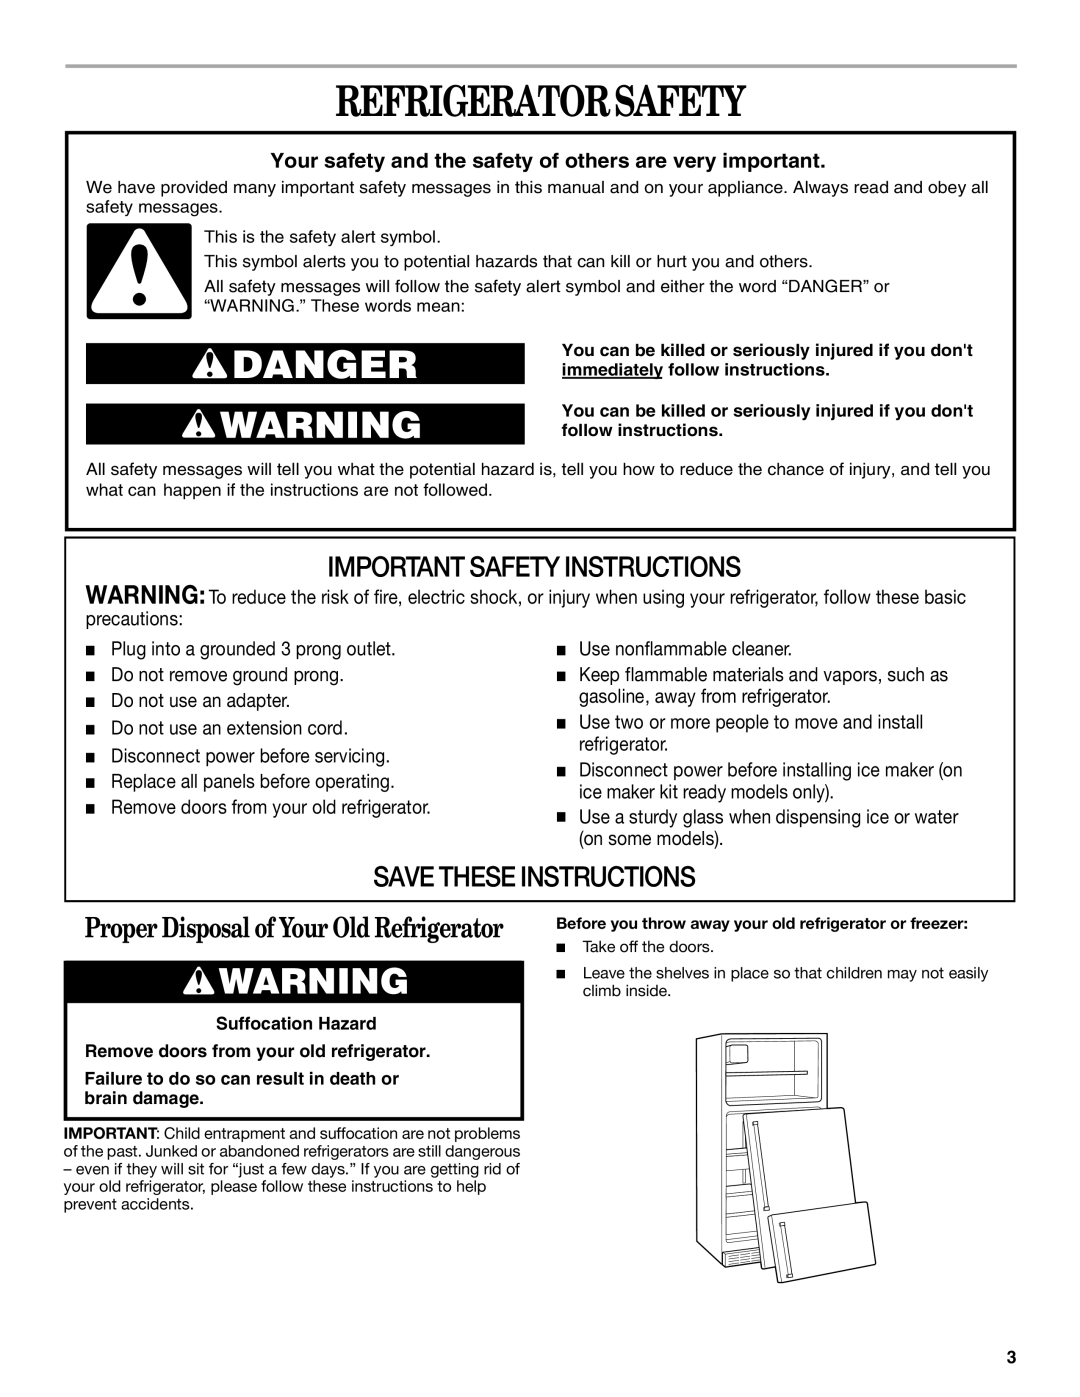 Whirlpool 2212539 manual Refrigeratorsafety, Proper Disposal of Your Old Refrigerator, Important Safety Instructions 